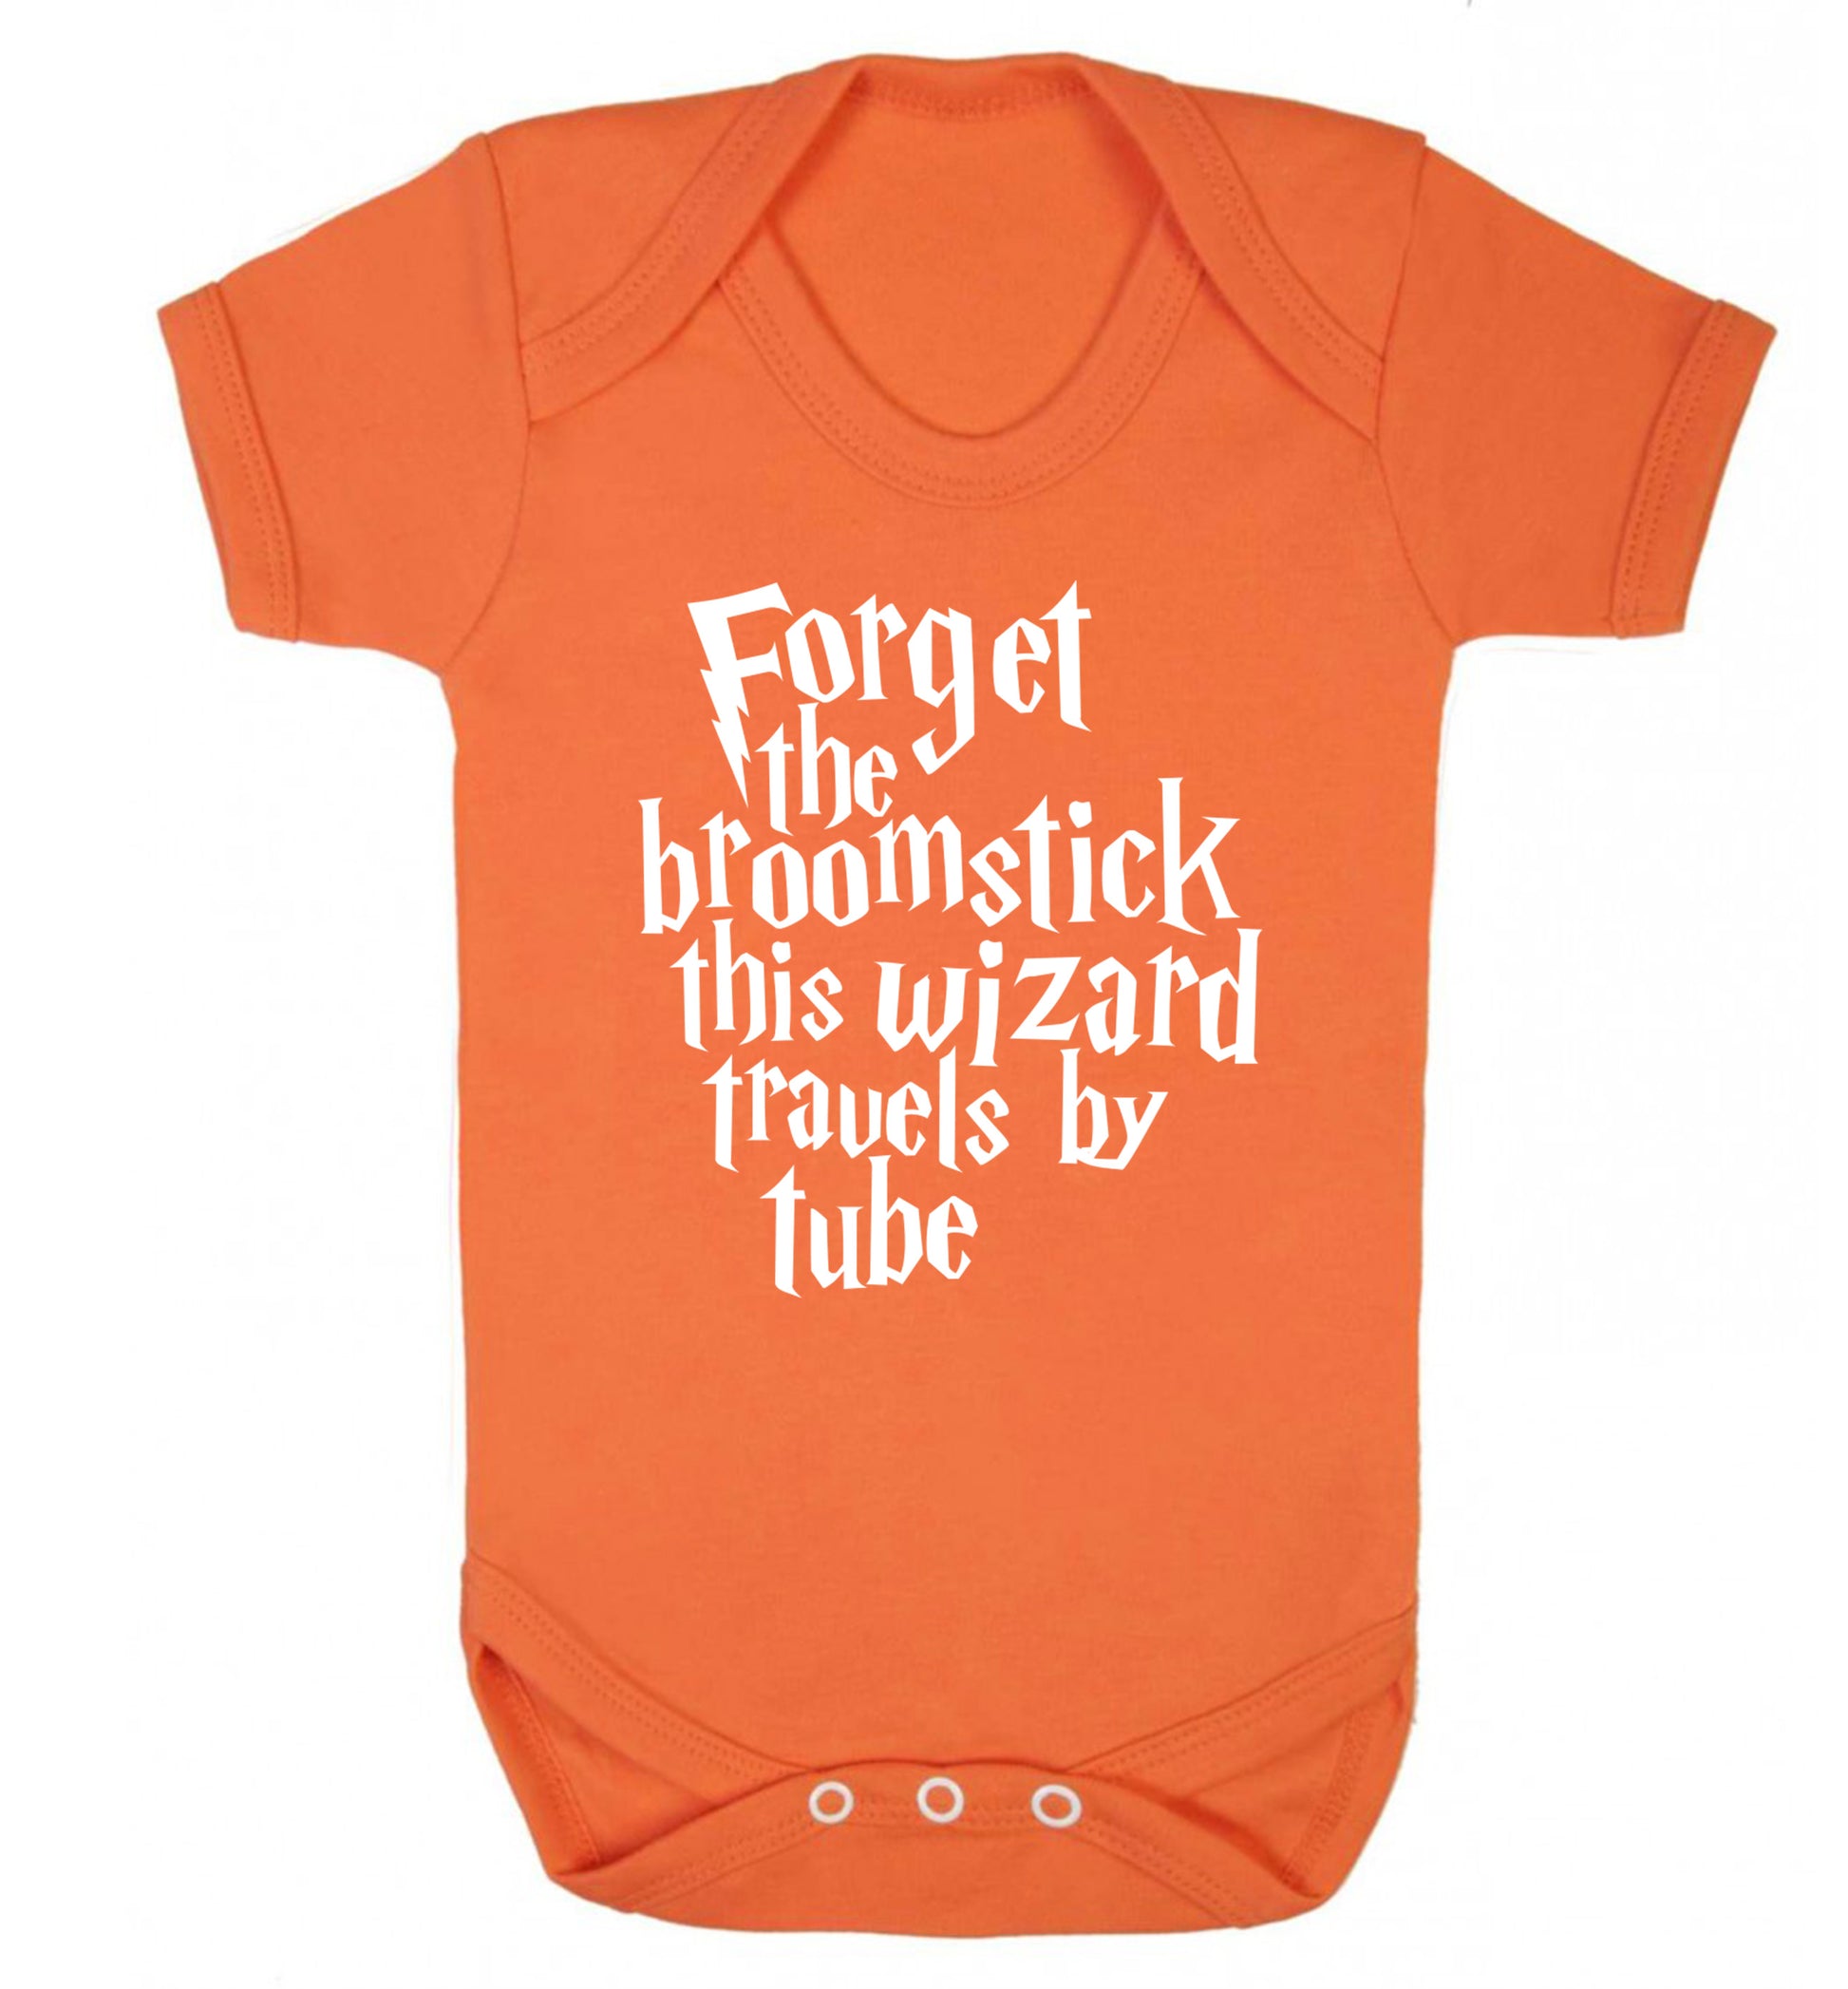 Forget the broomstick this wizard travels by tube Baby Vest orange 18-24 months